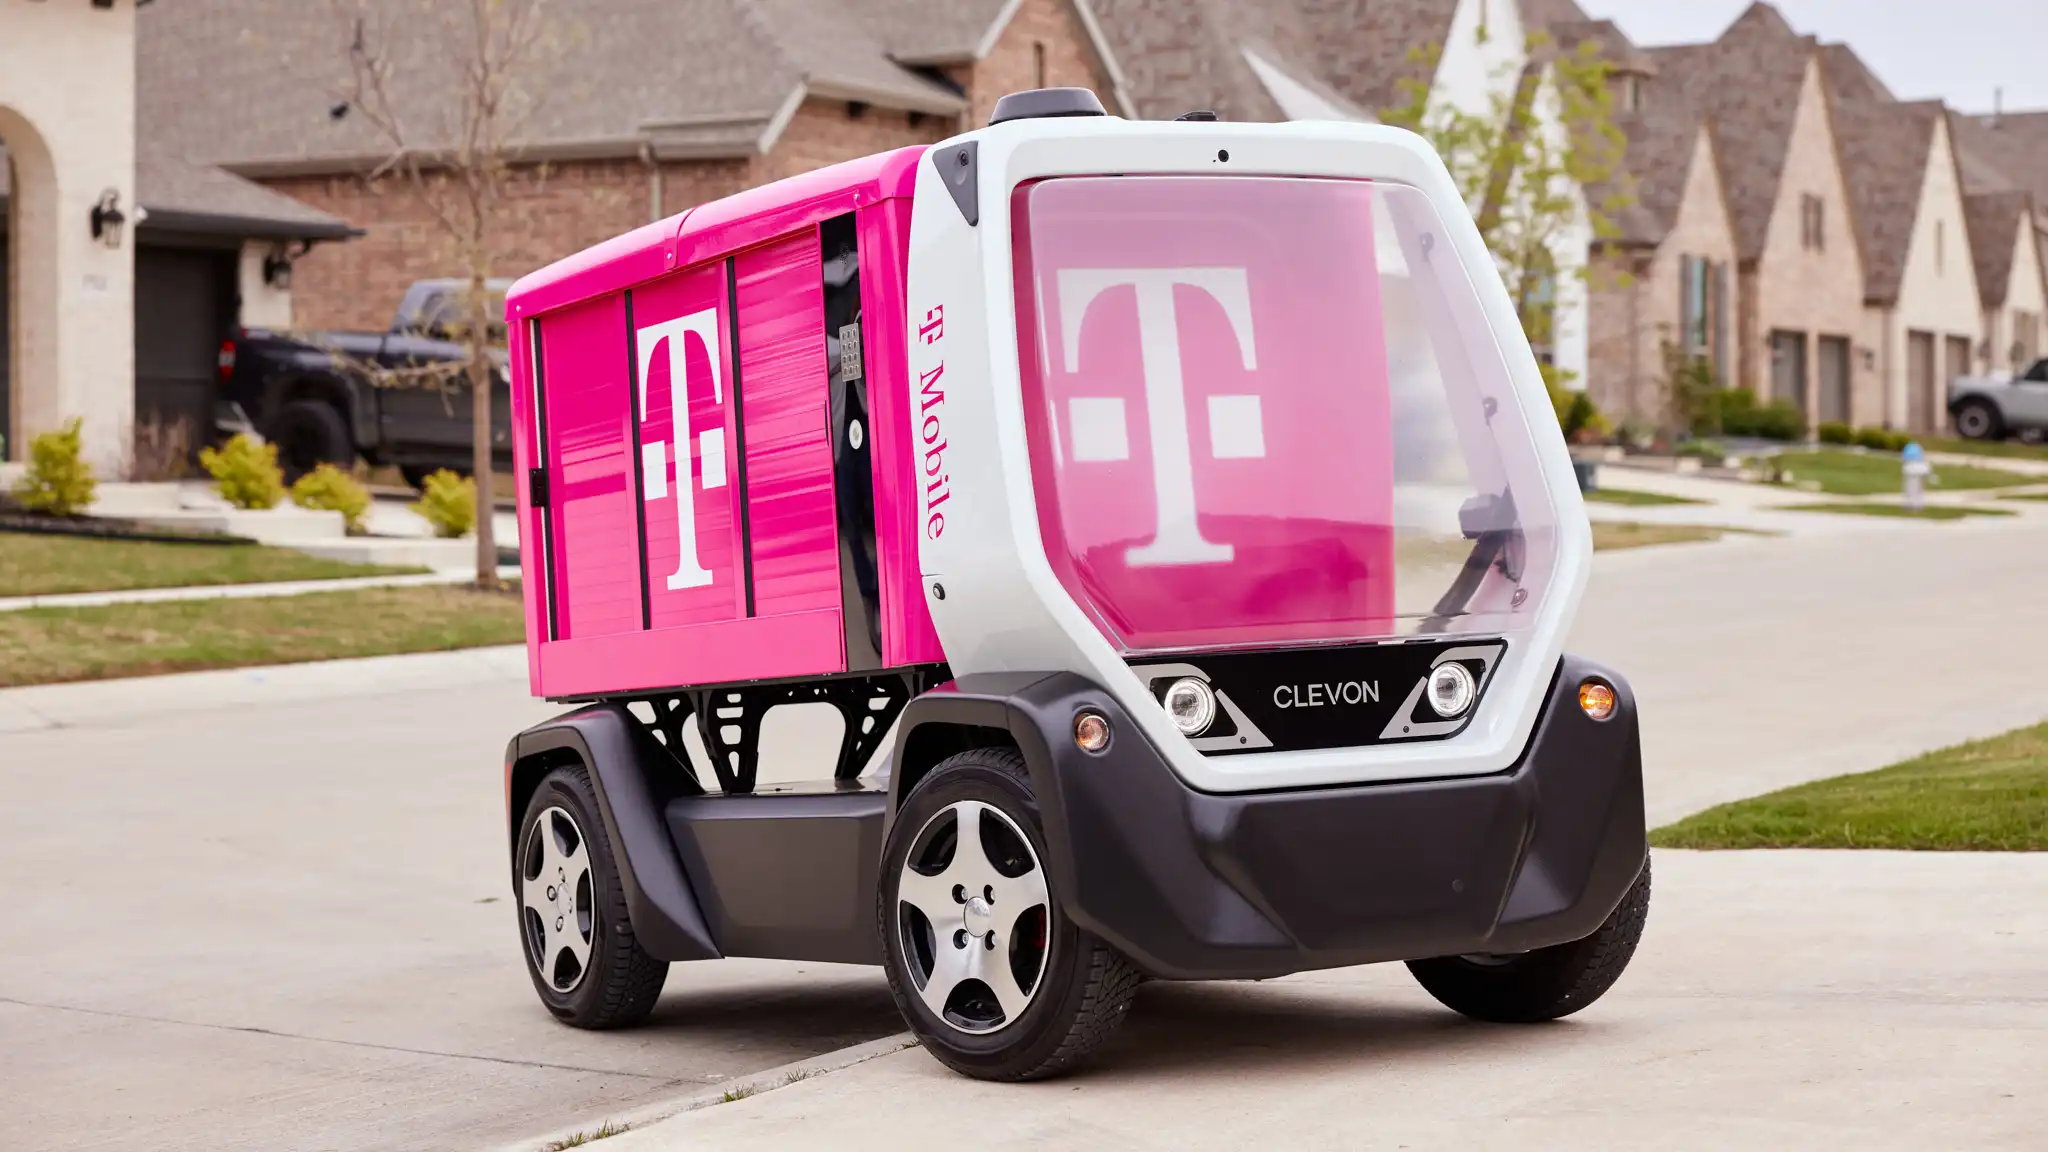 Delivery robot CLEVON 1 powered by Tmobile connectivity